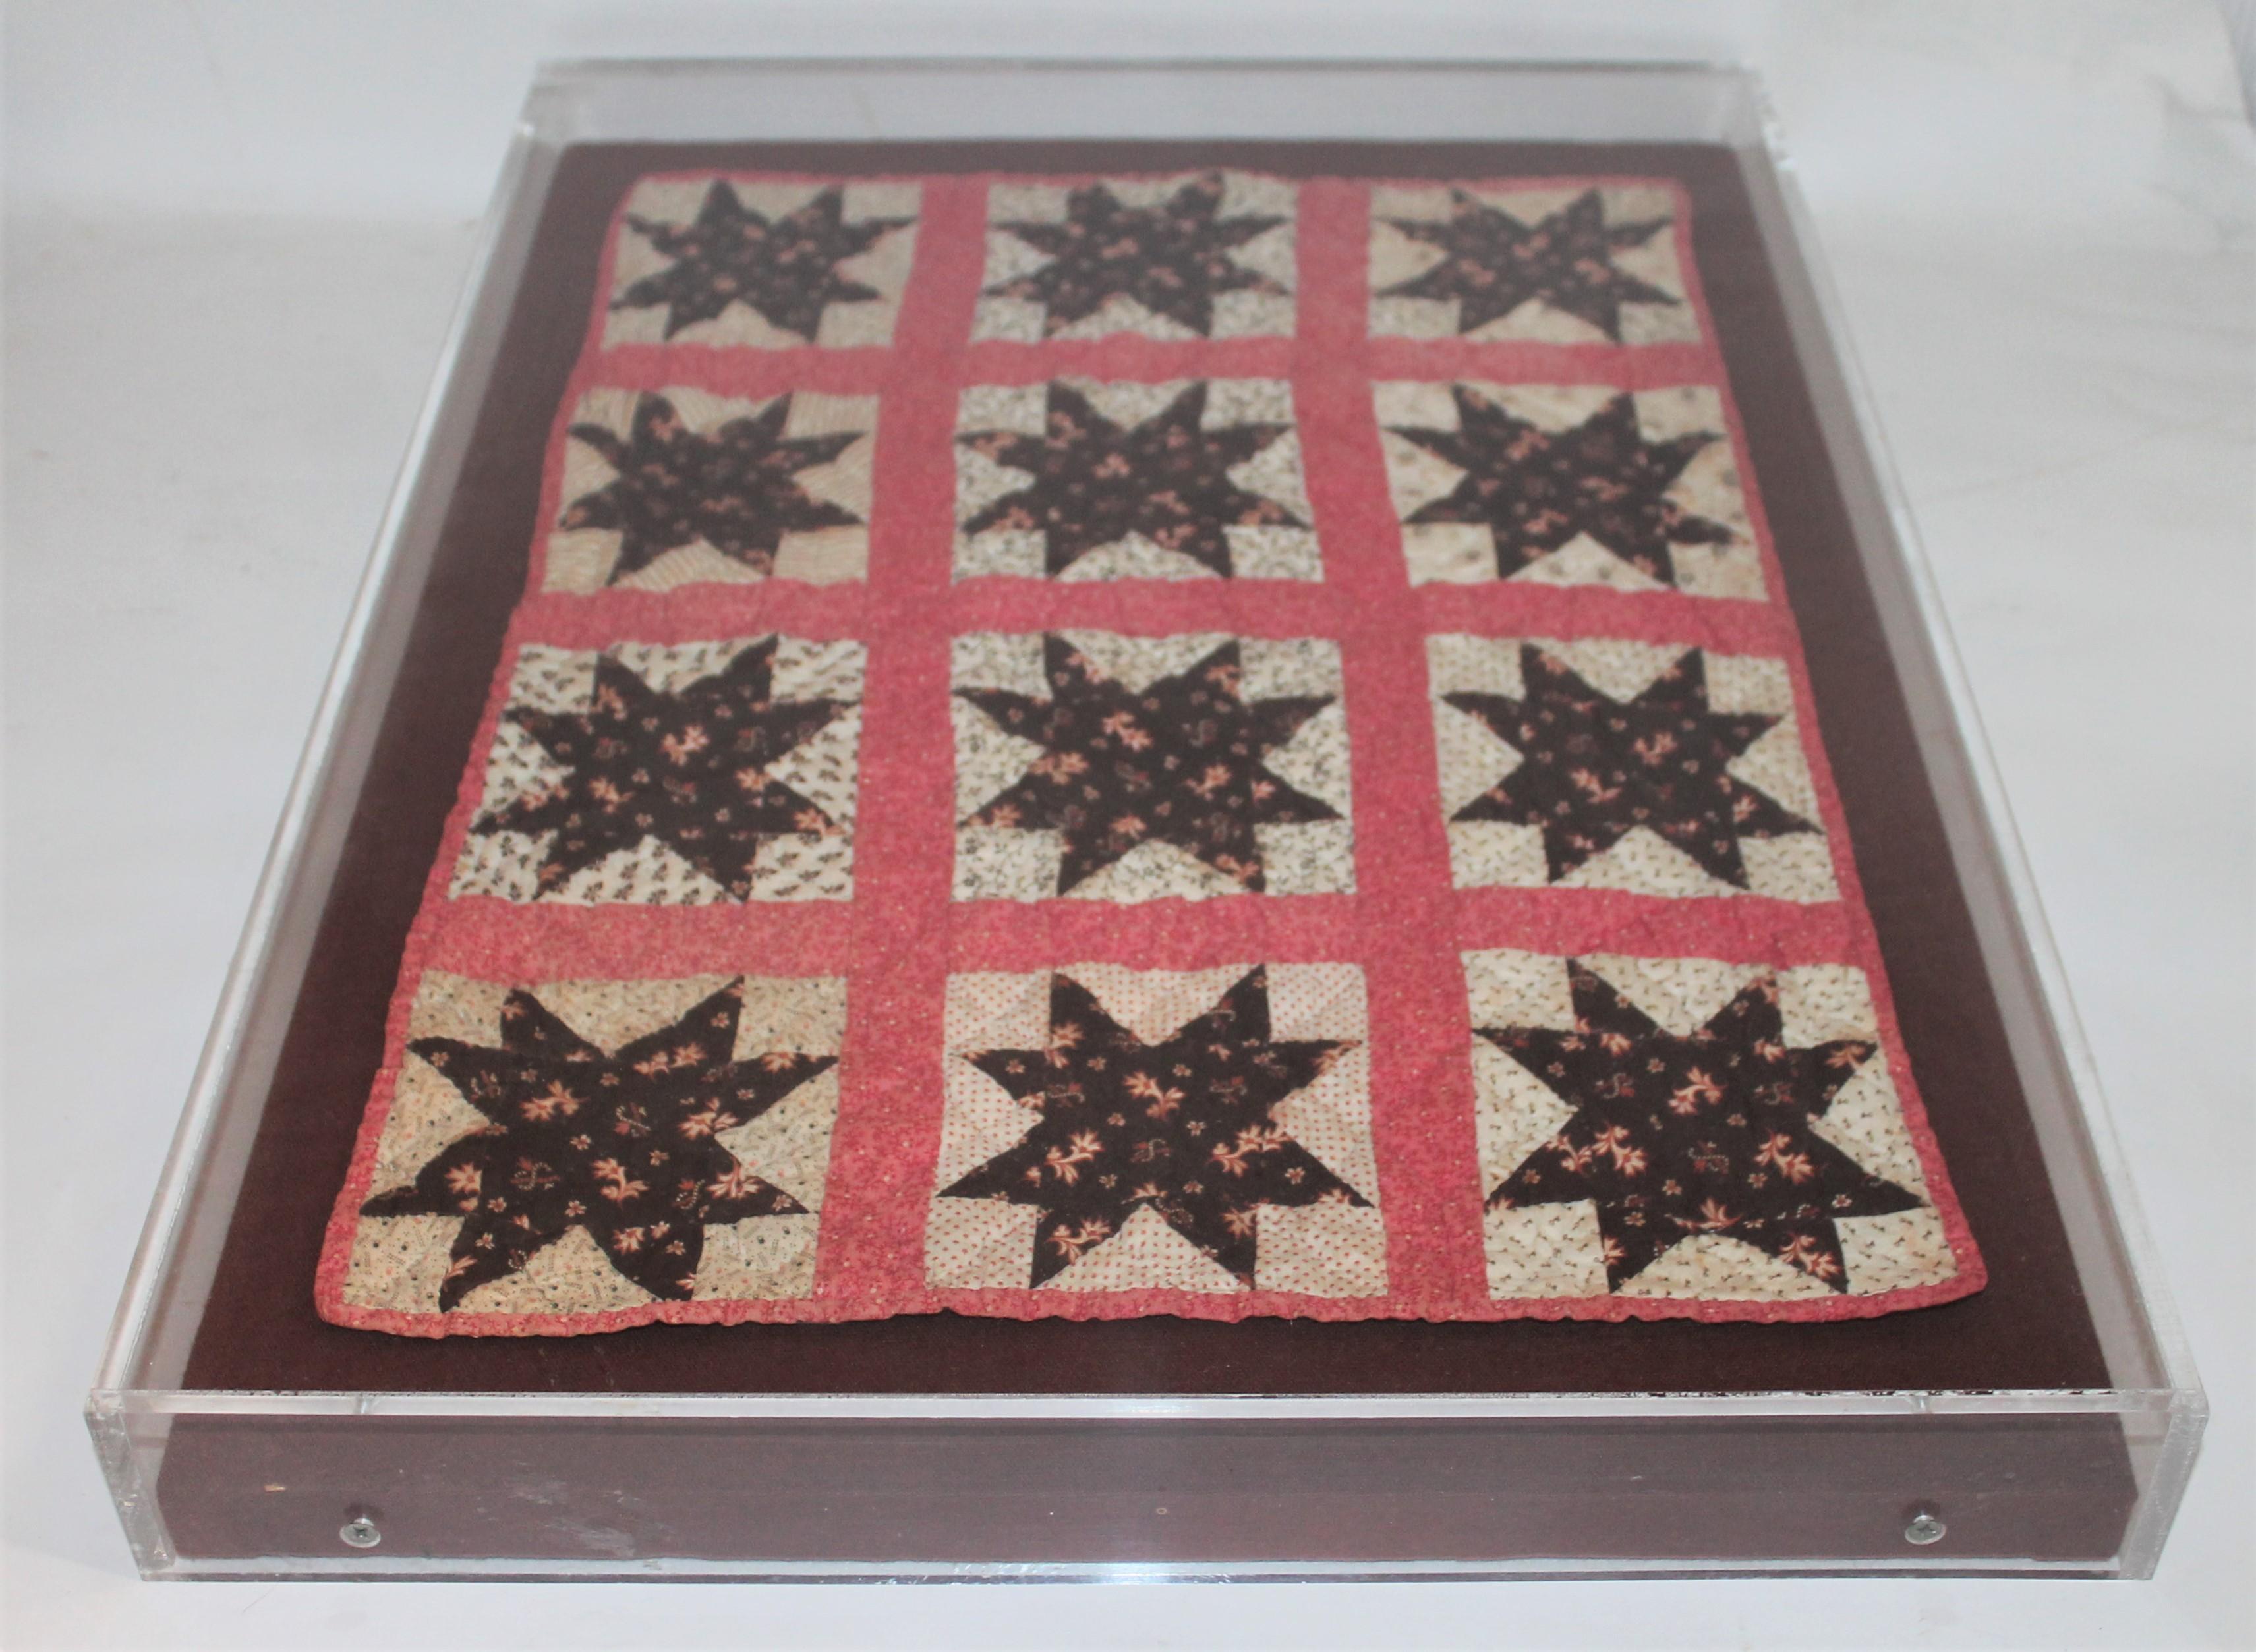 This super rare doll quilt is in great condition and is prof. mounted in a plexy. Amazing color and six point star contained within the lines. Made from cotton and placed on a custom made linen stretcher.